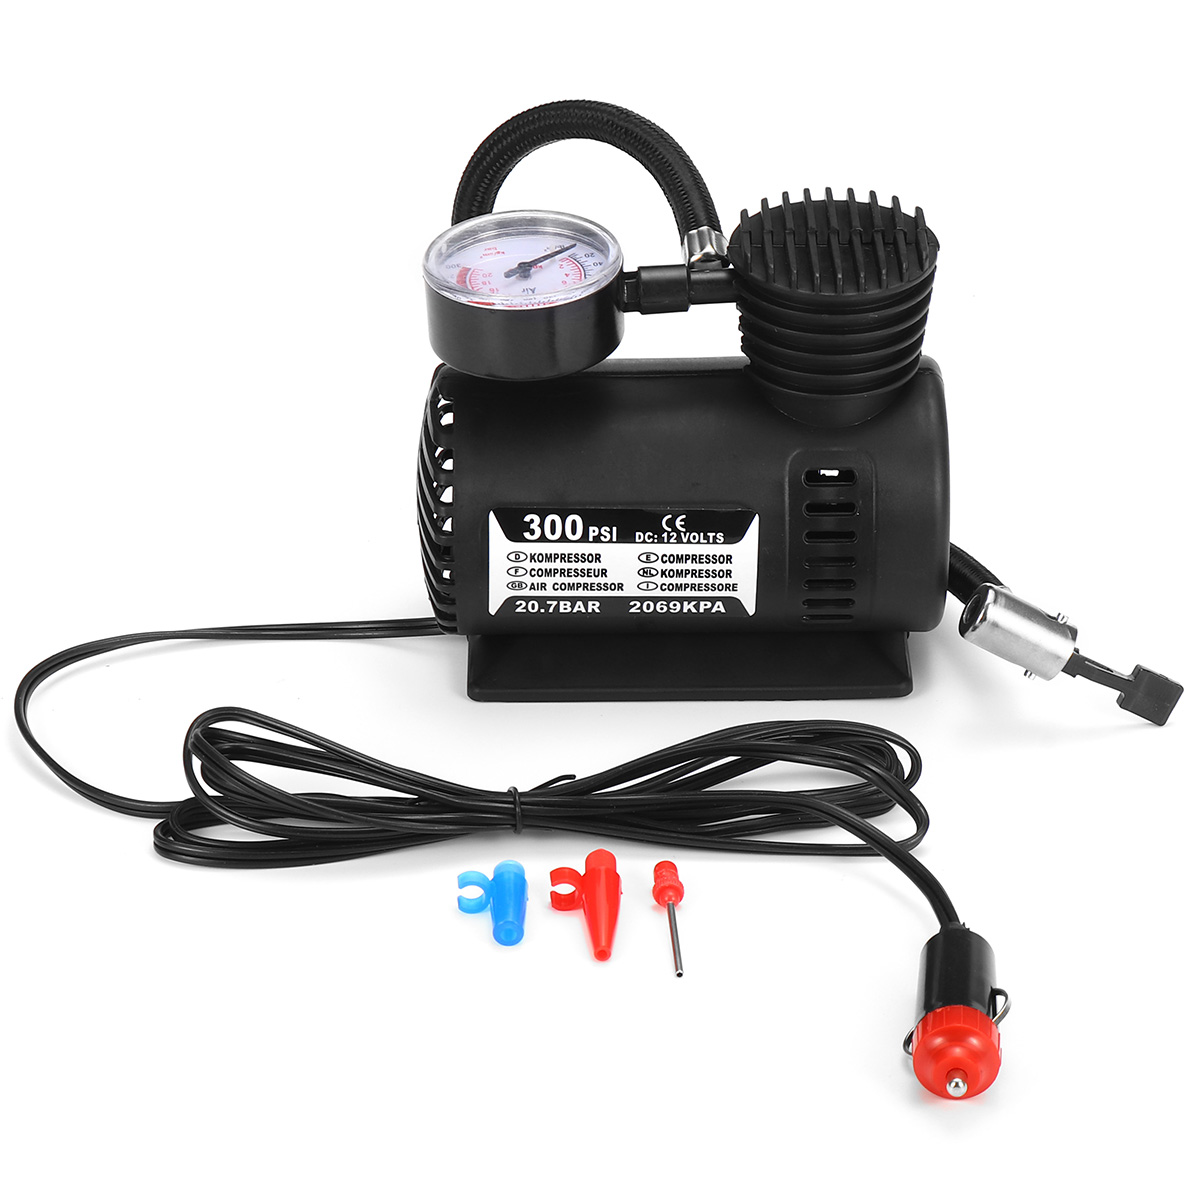 DC-12V-300PSI-Car-Air-Compressor-Portable-Tire-Inflator-Air-Pump-For-Motorcycle-Car-Auto-Bicycle-1715750-7